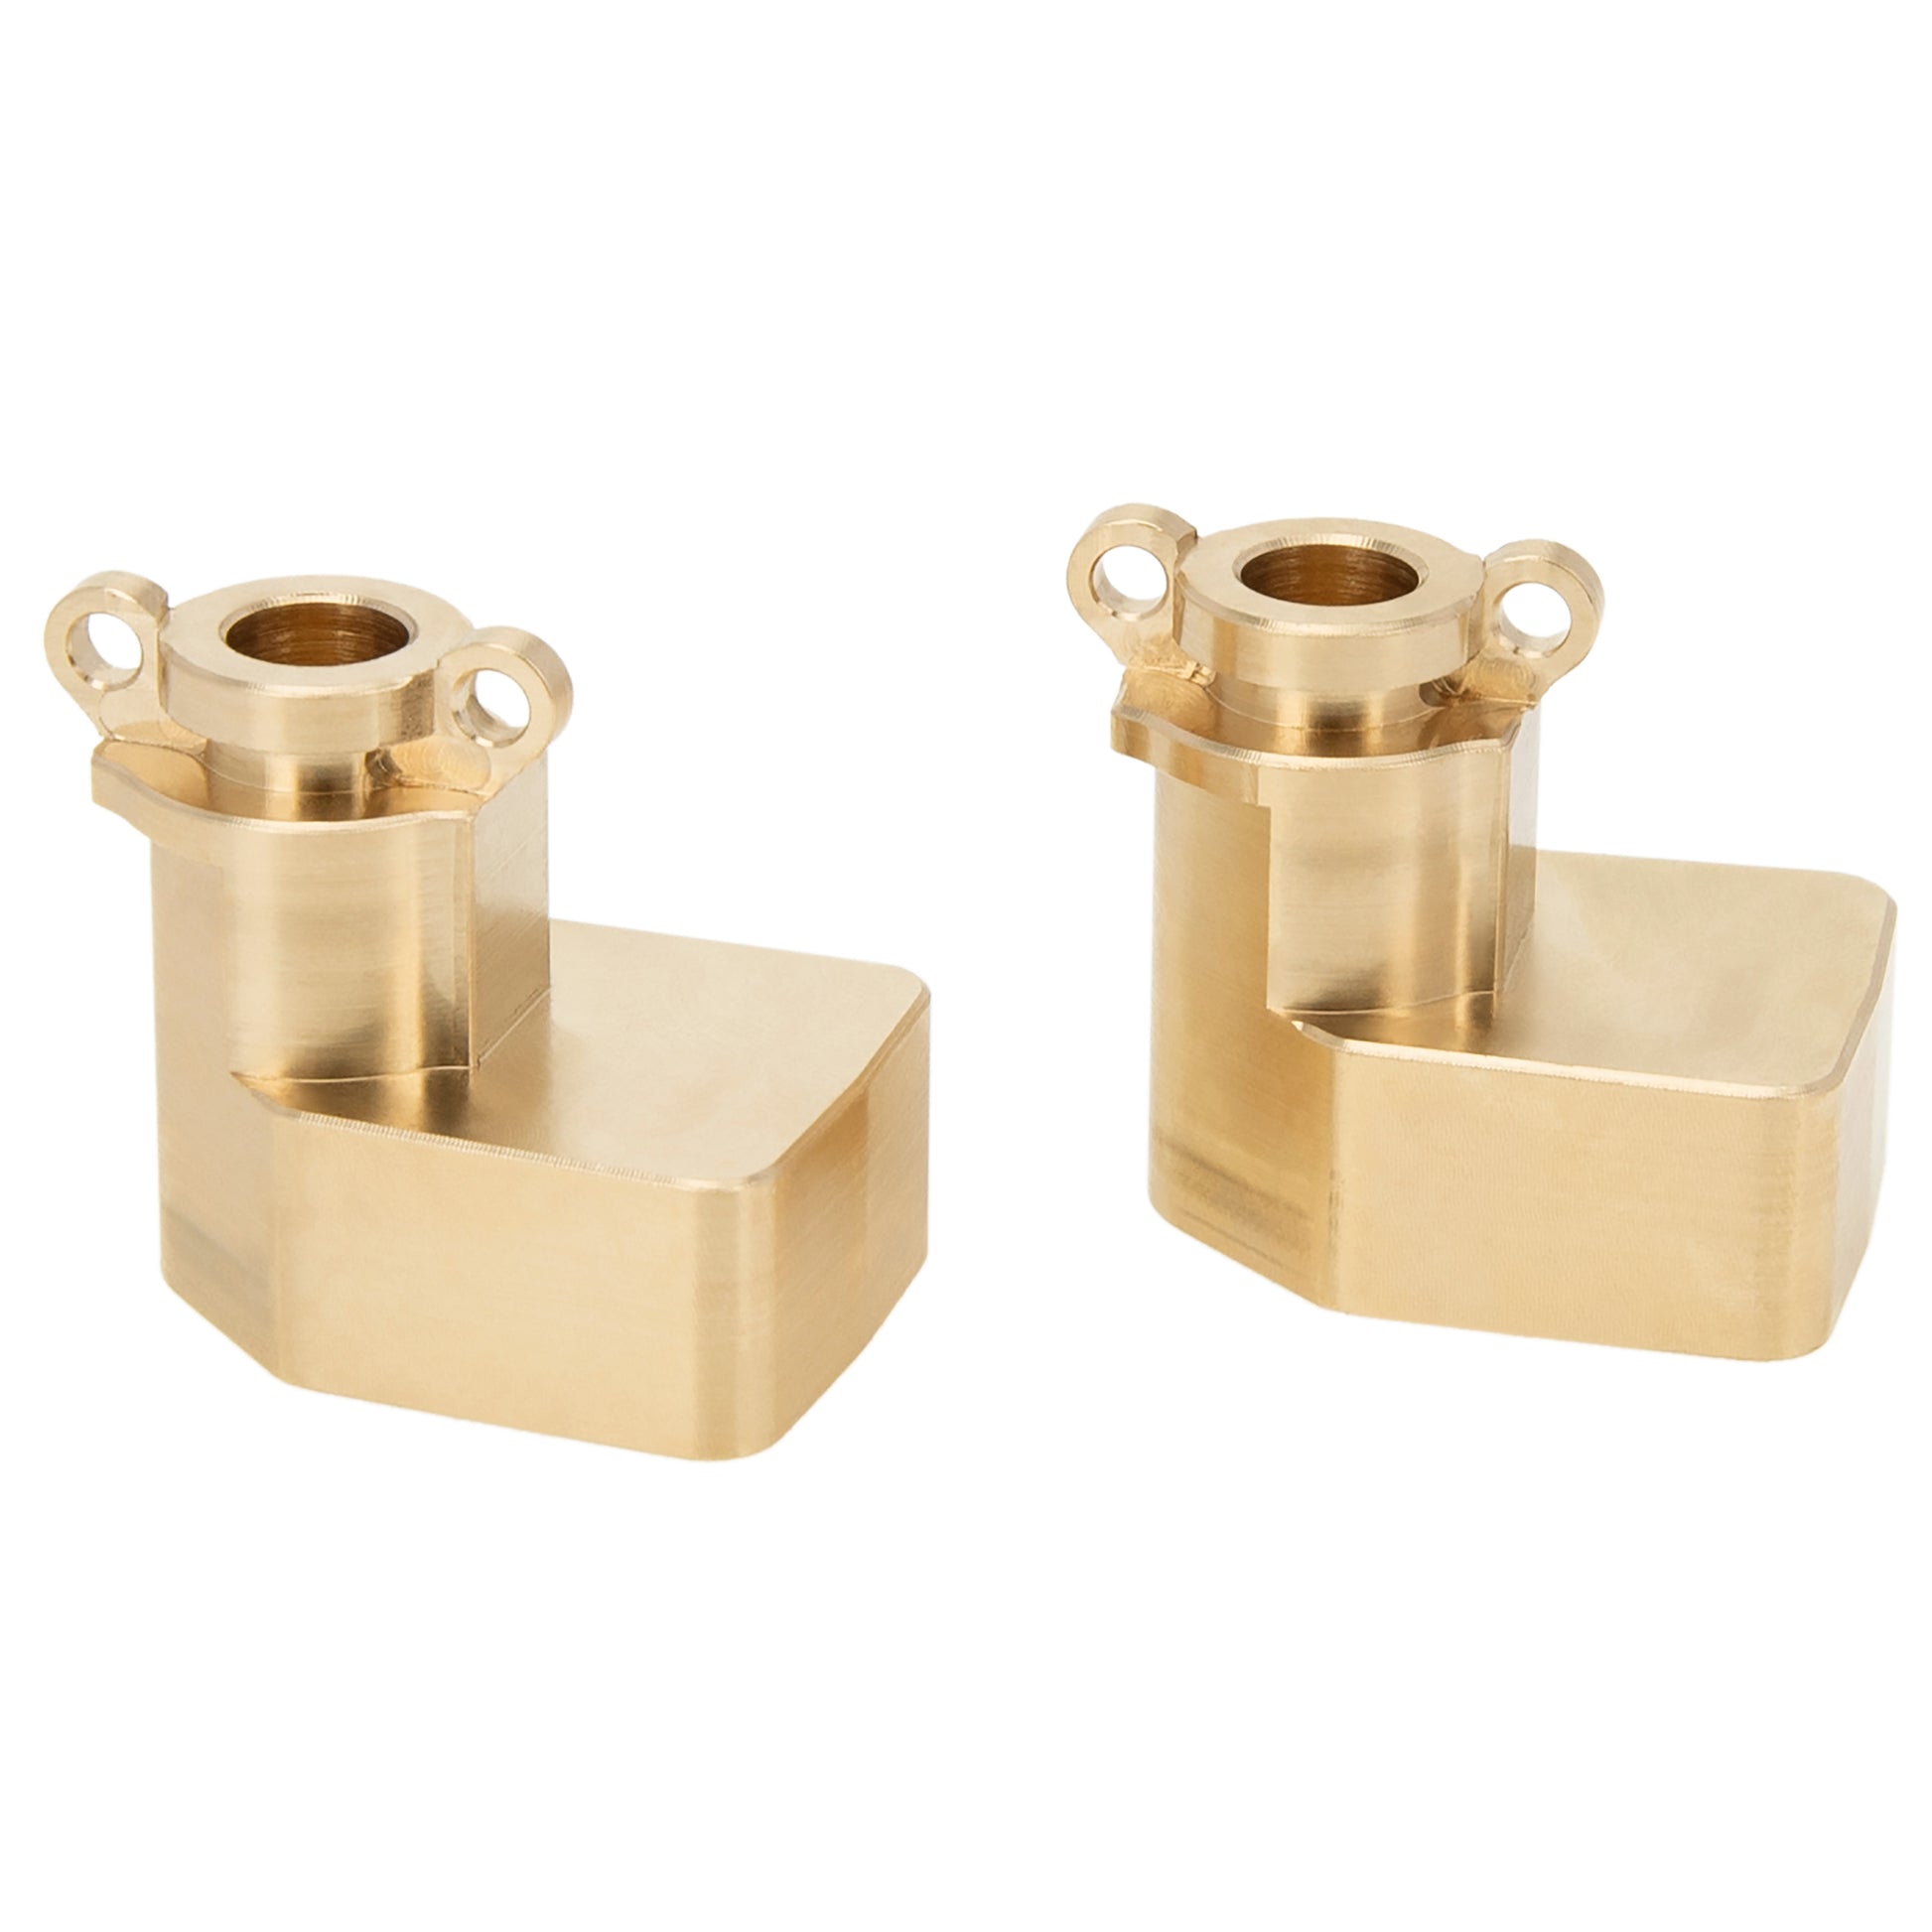  Gold Brass Rear Axle Carriers for UTB18